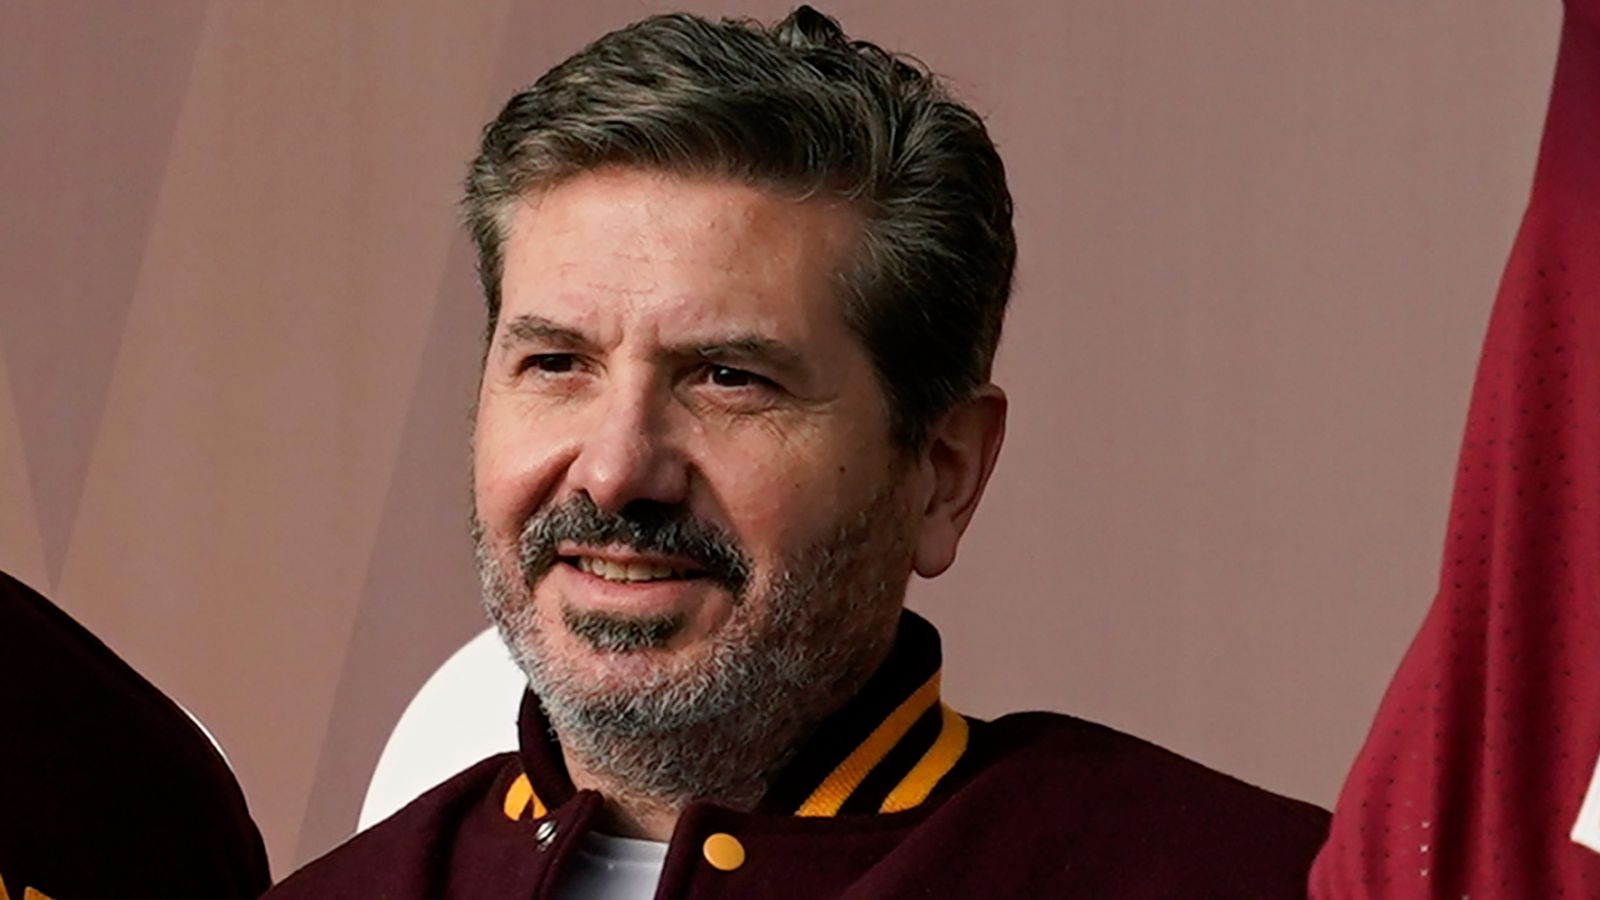 Dan Snyder: Jim Irsay says Washington Commanders owner’s removal from NFL should be given ‘serious consideration’